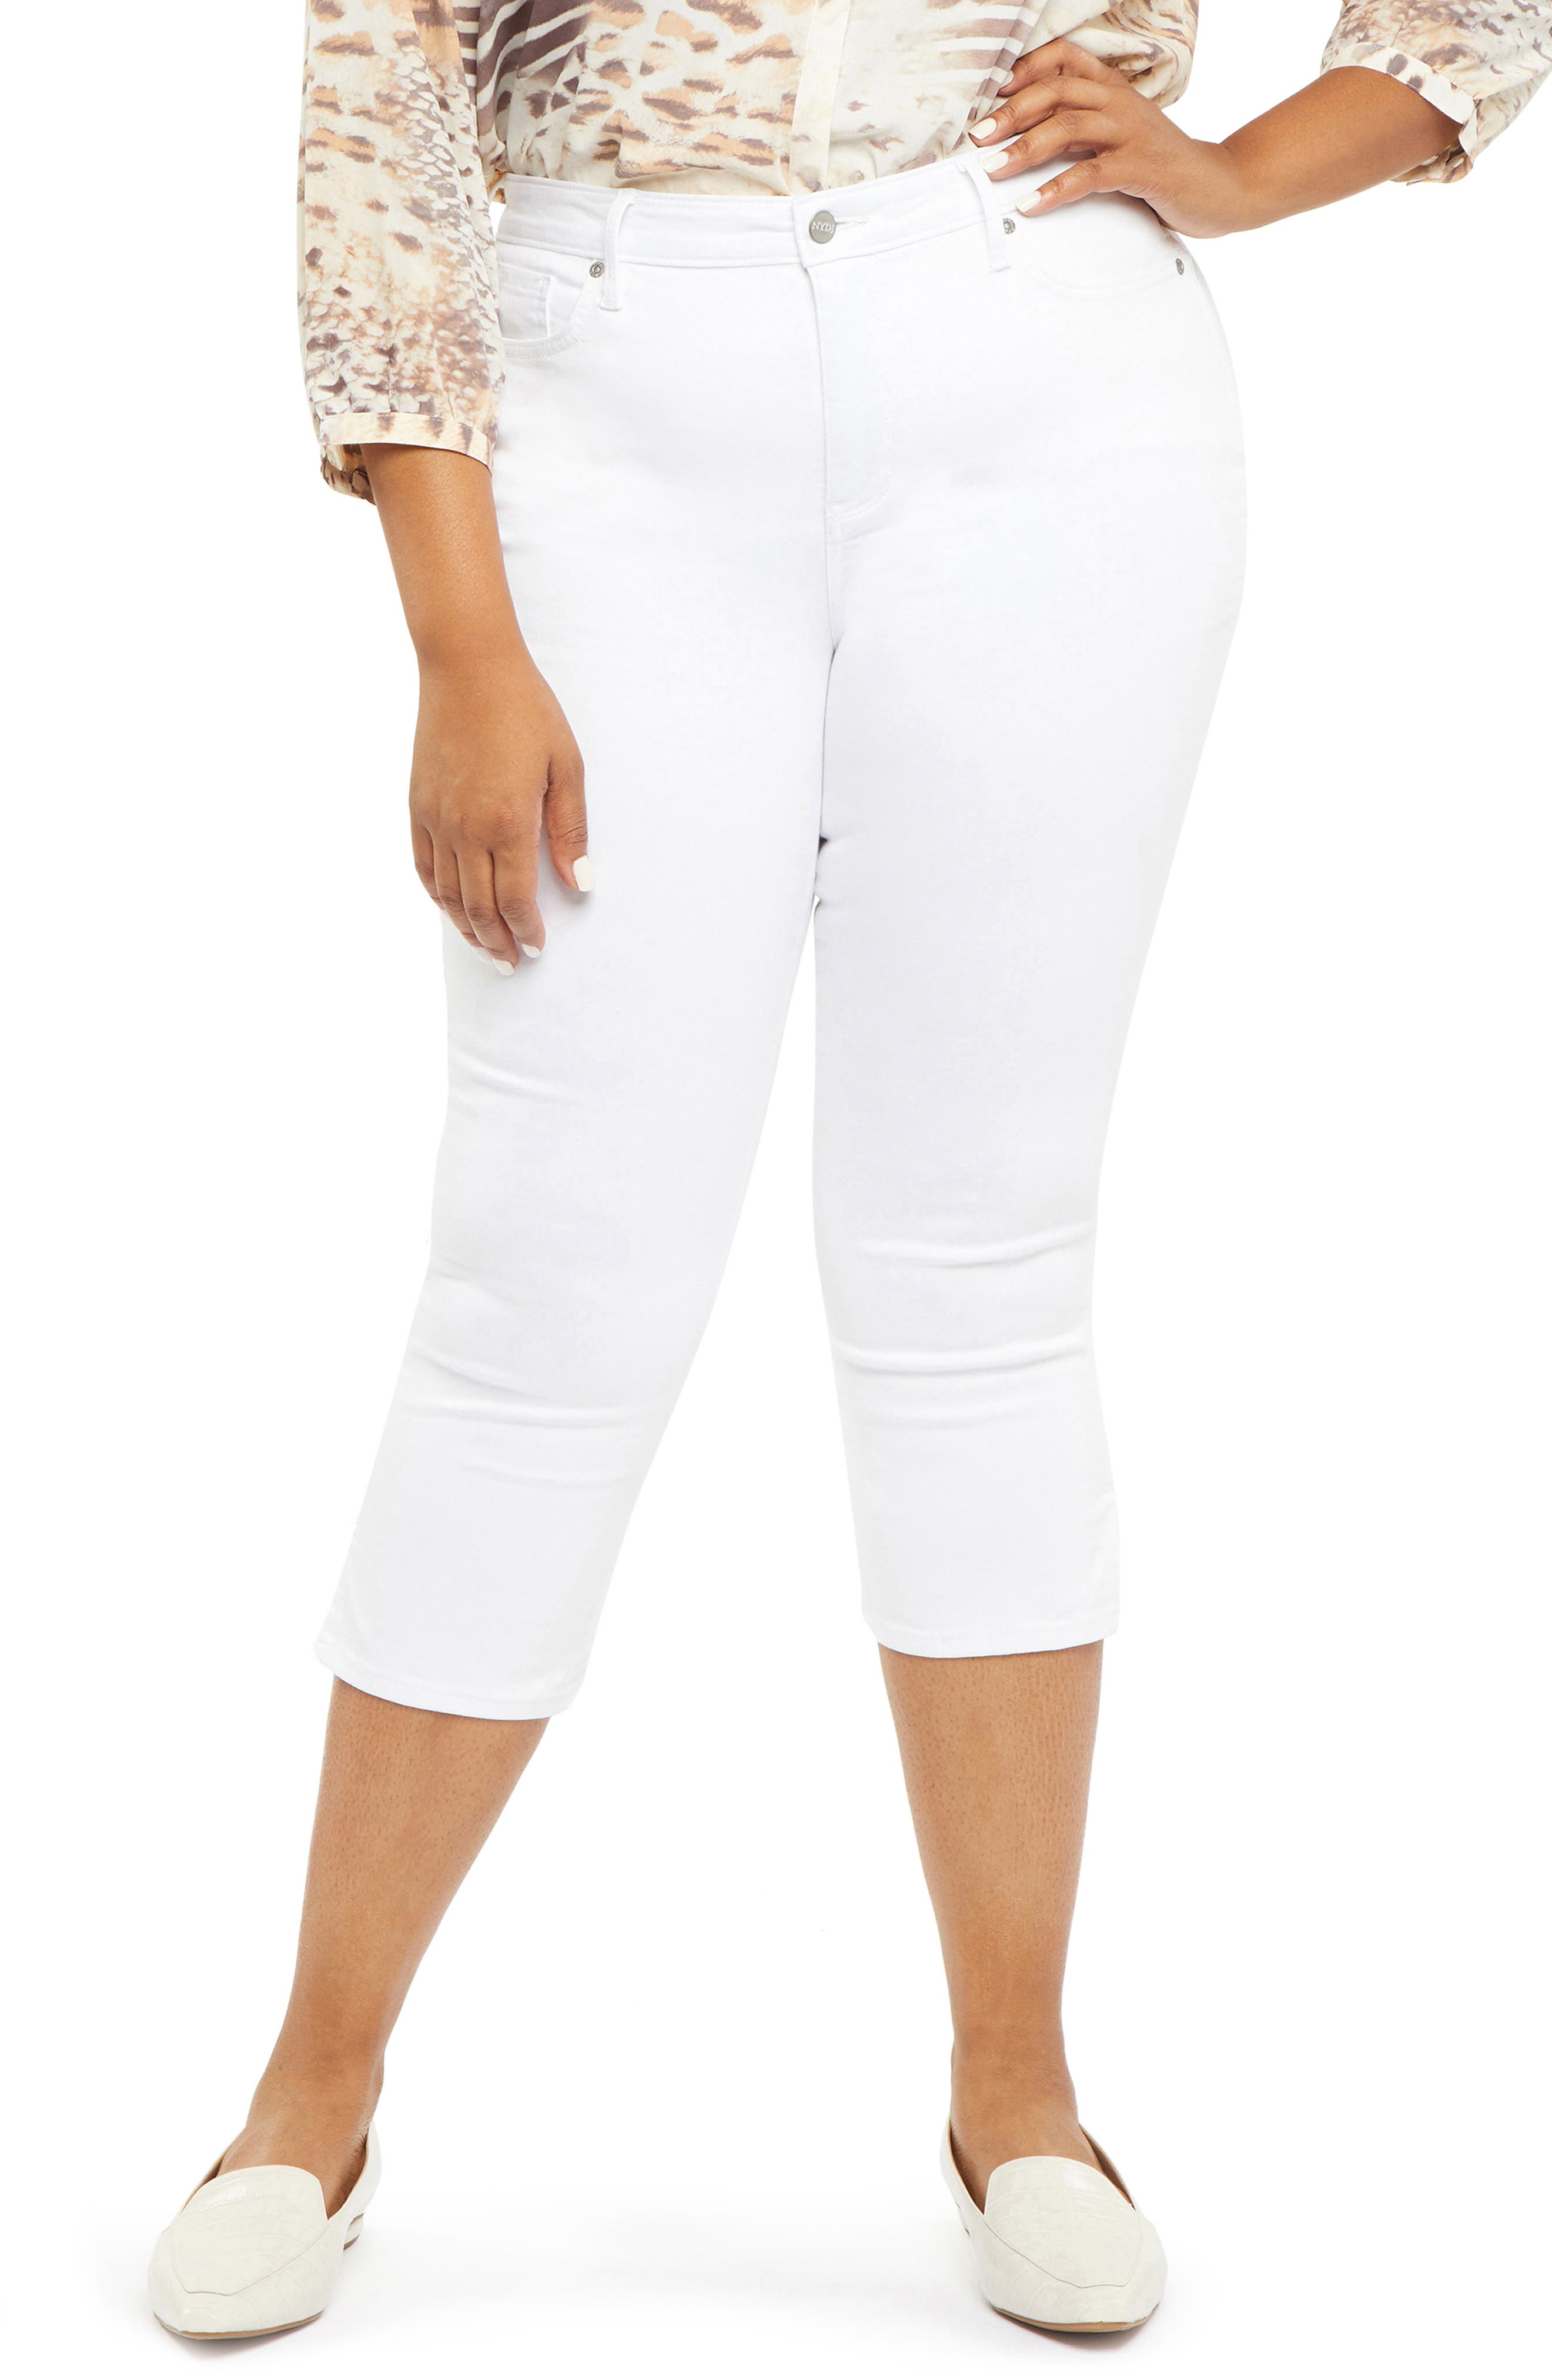 NYDJ Womens Plus Size Pull on Skinny Ankle Jean with Side Slits Jeans